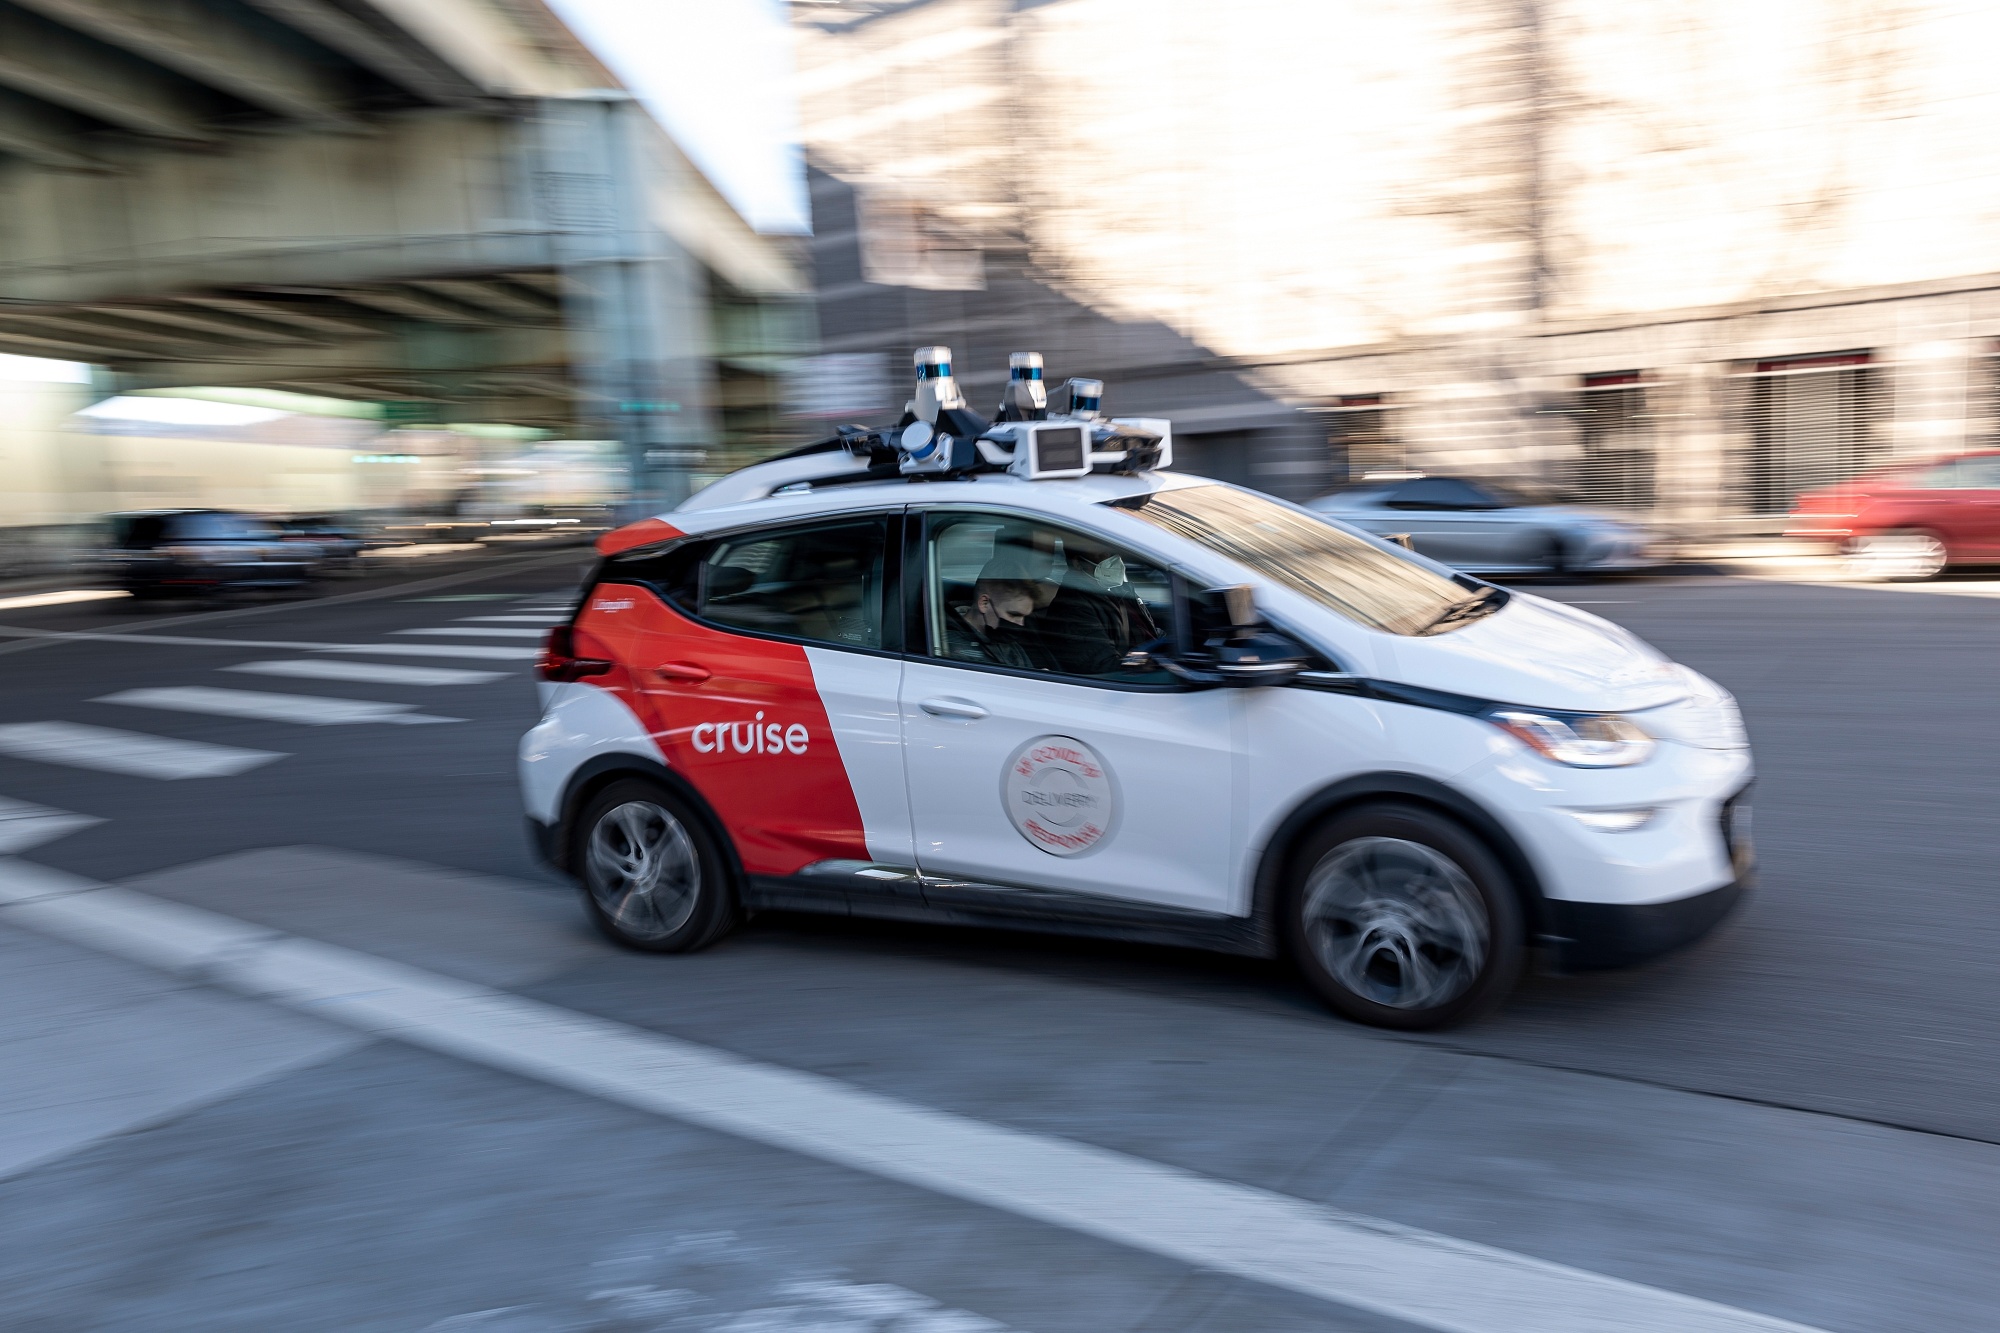 Nearly 400 crashes in less than a year with self-driving cars